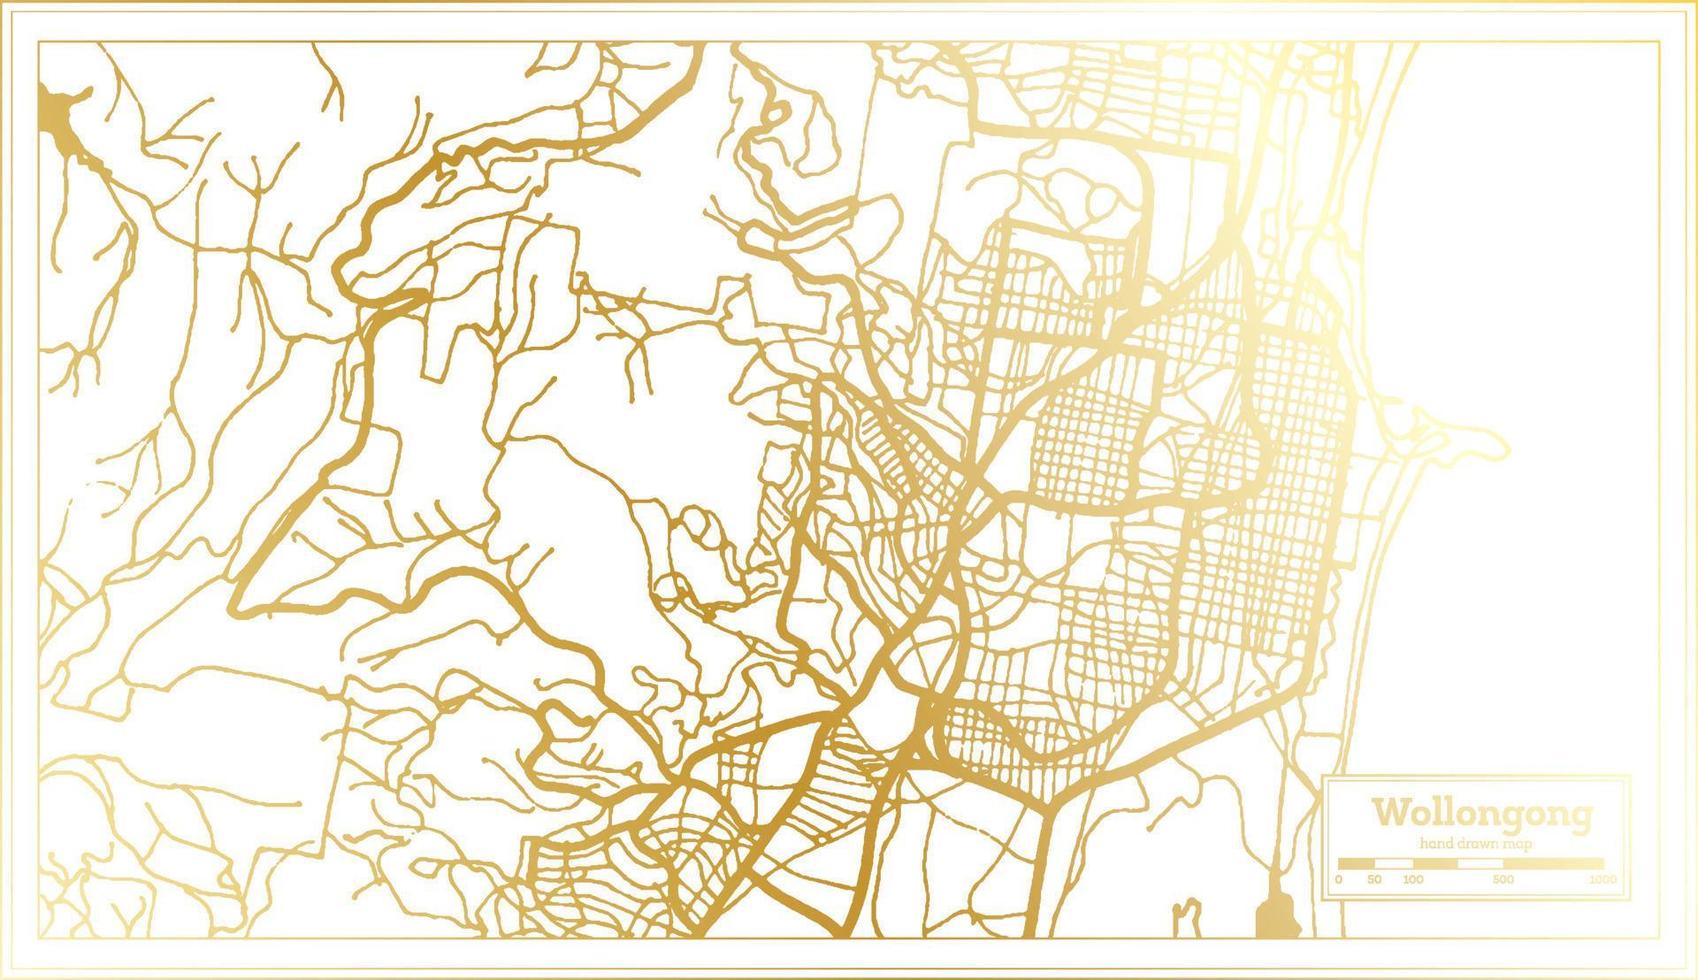 Wollongong Australia City Map in Retro Style in Golden Color. Outline Map. vector